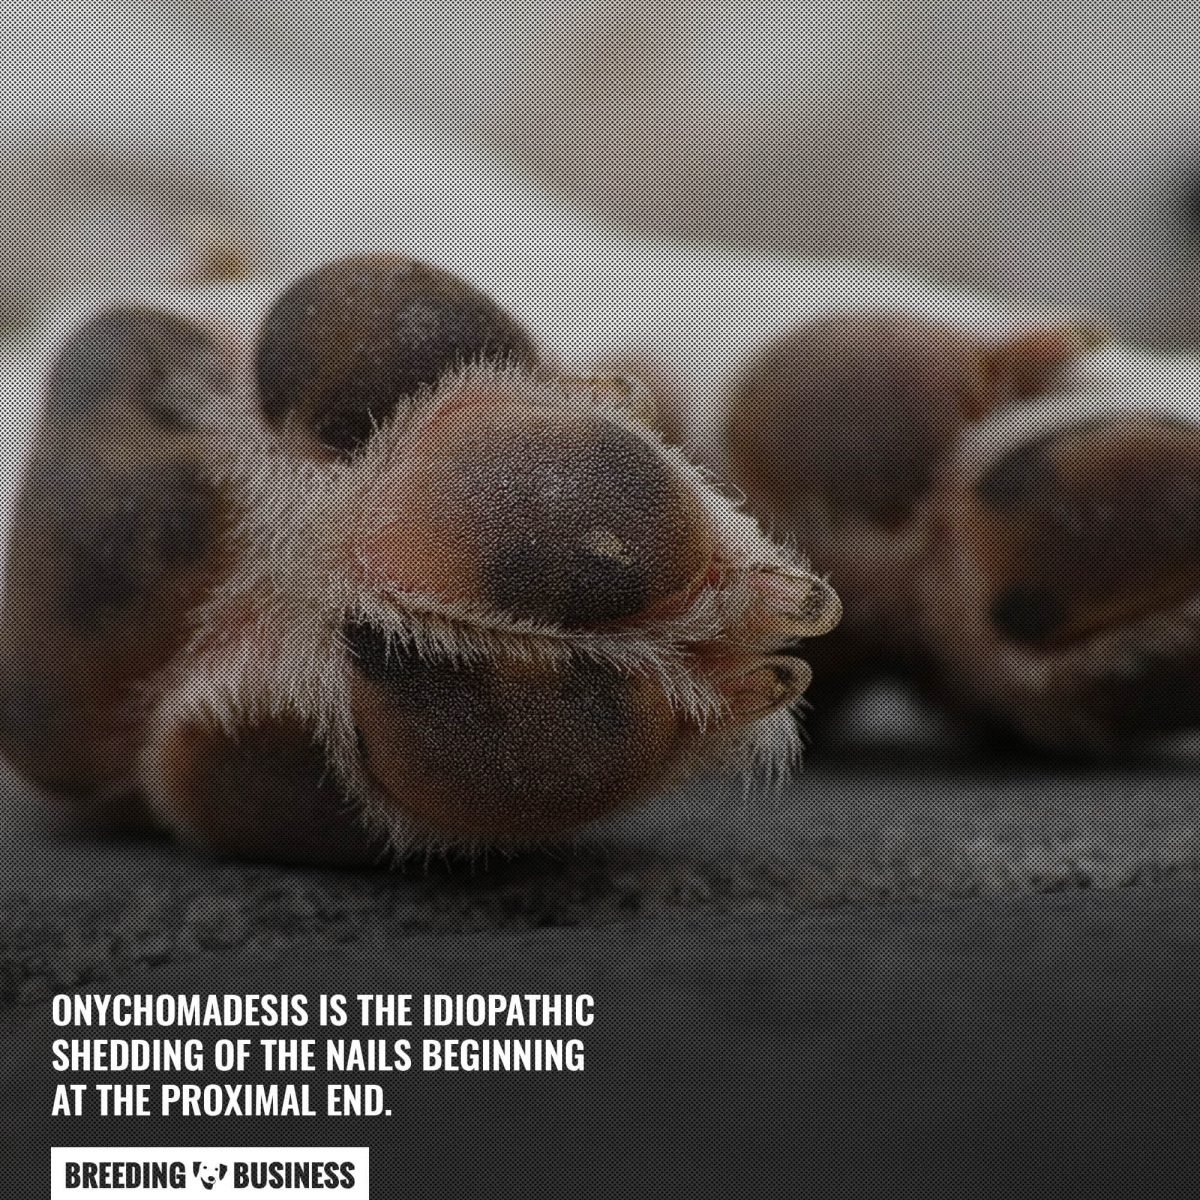 onychomadesis in dogs